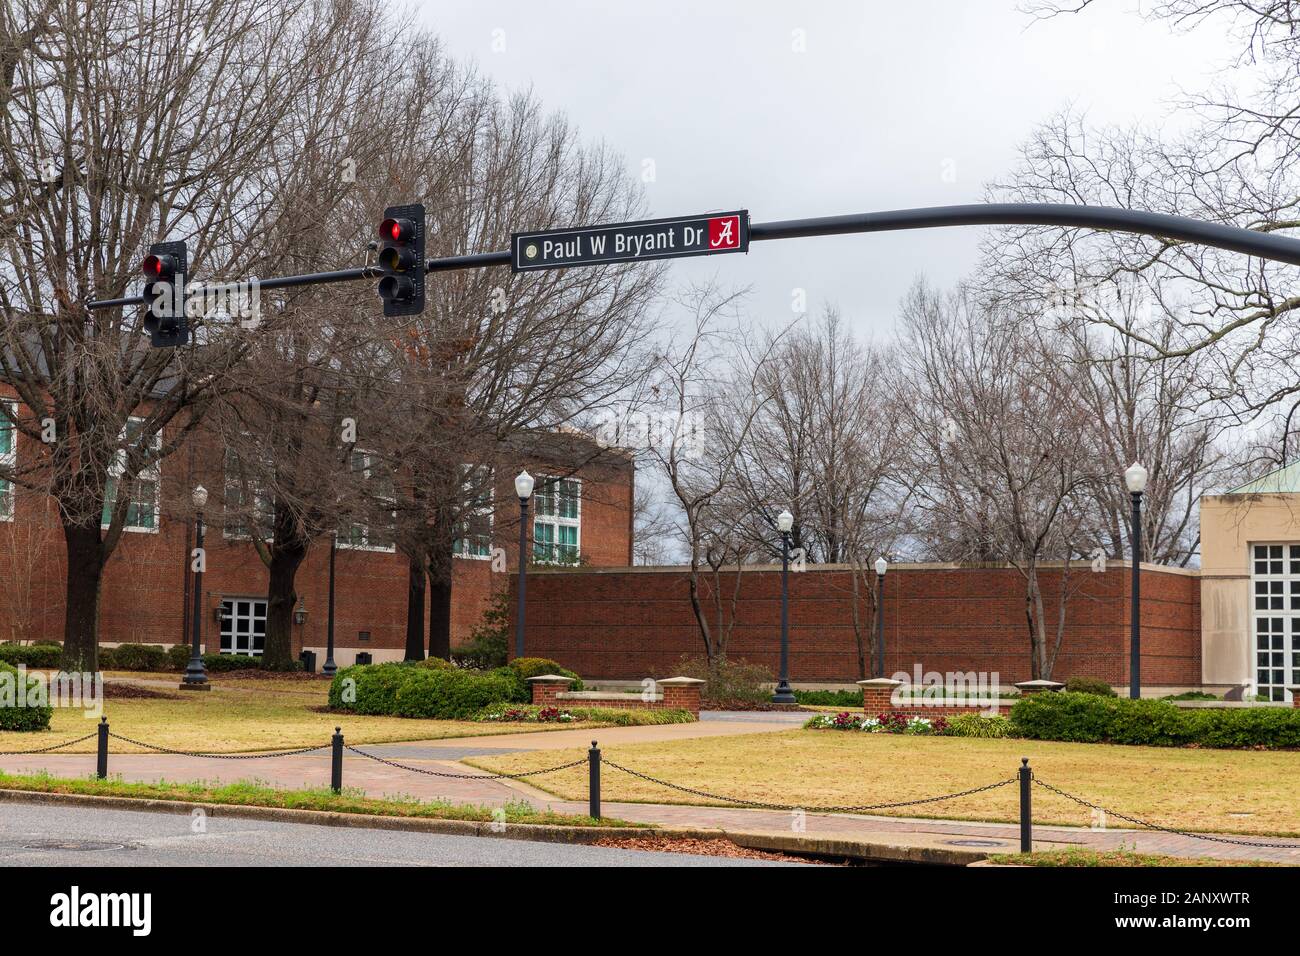 Tuscaloosa, AL / USA - December 29, 2019: Paul W Bryant Dr sign on the Campus of the University of Alabama Stock Photo